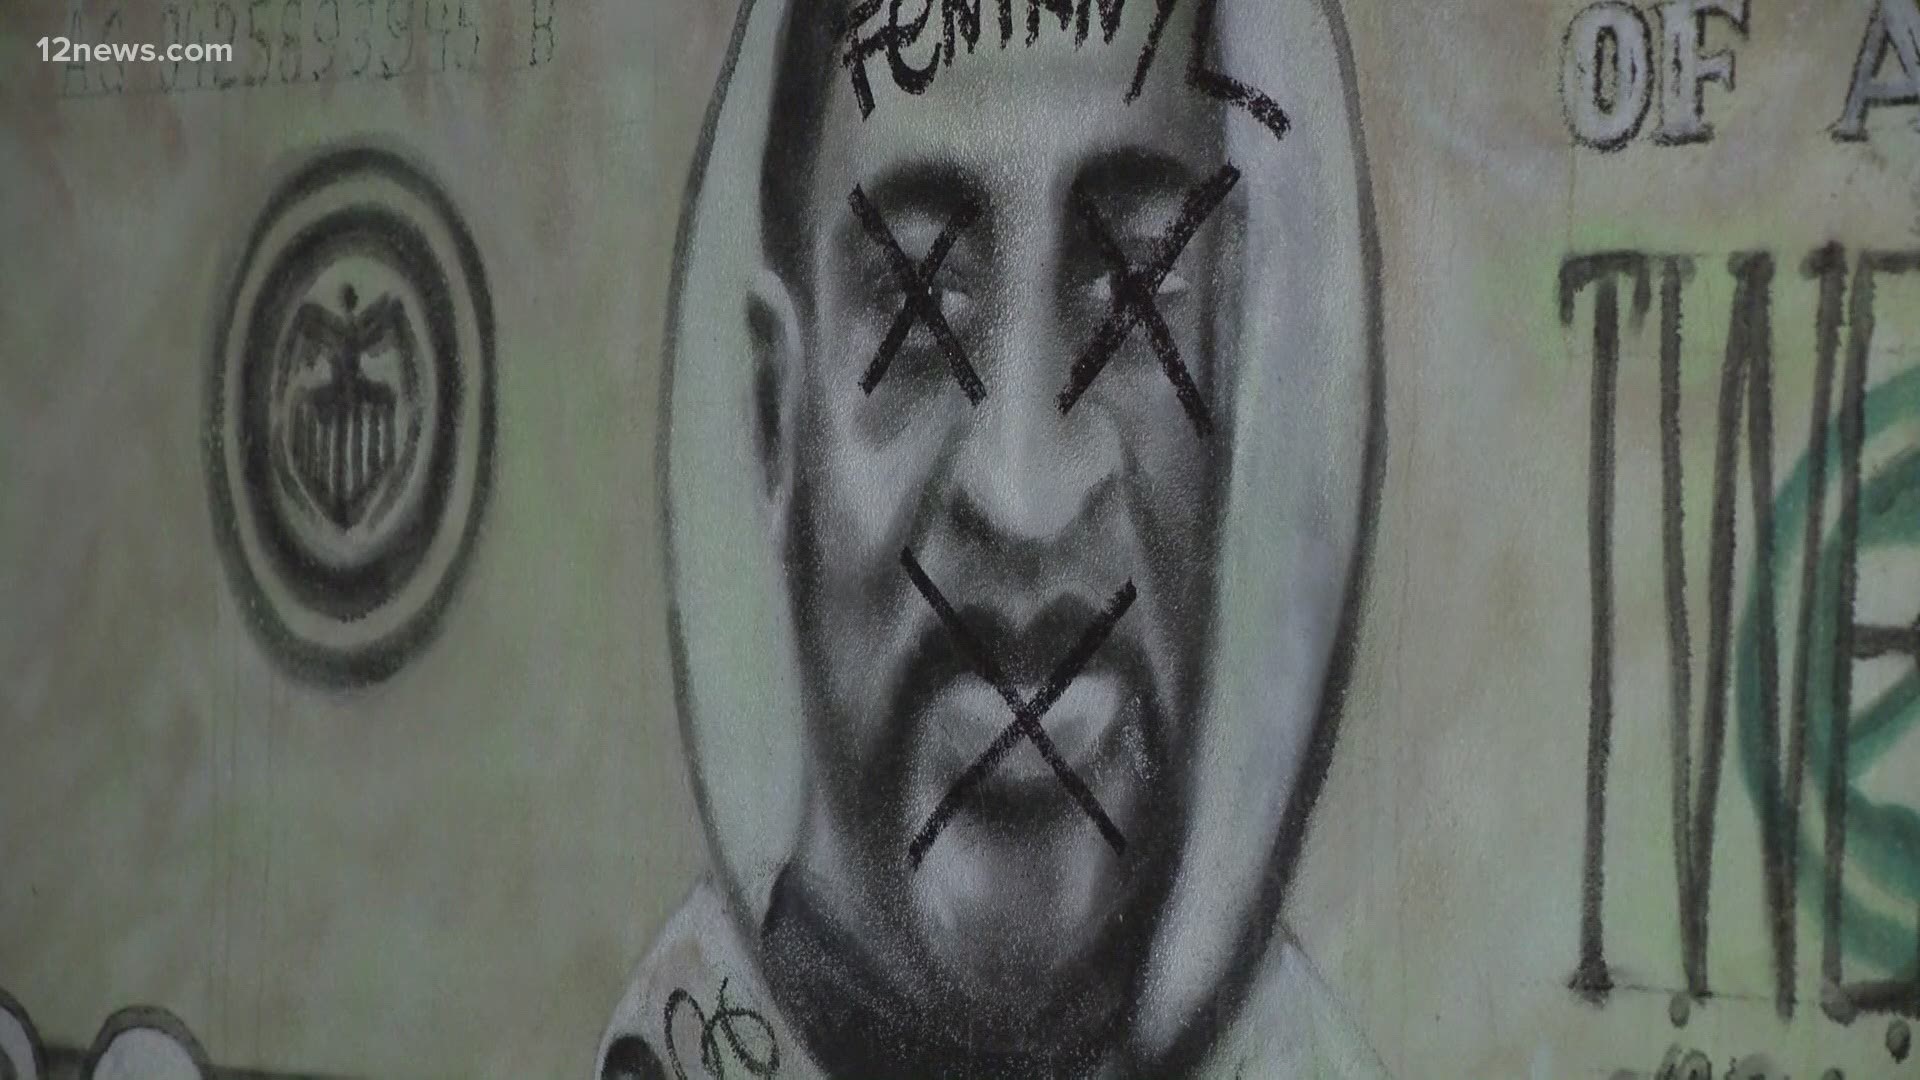 A Phoenix mural in honor of George Floyd has been vandalized with the word “fentanyl” and counterfeit money.